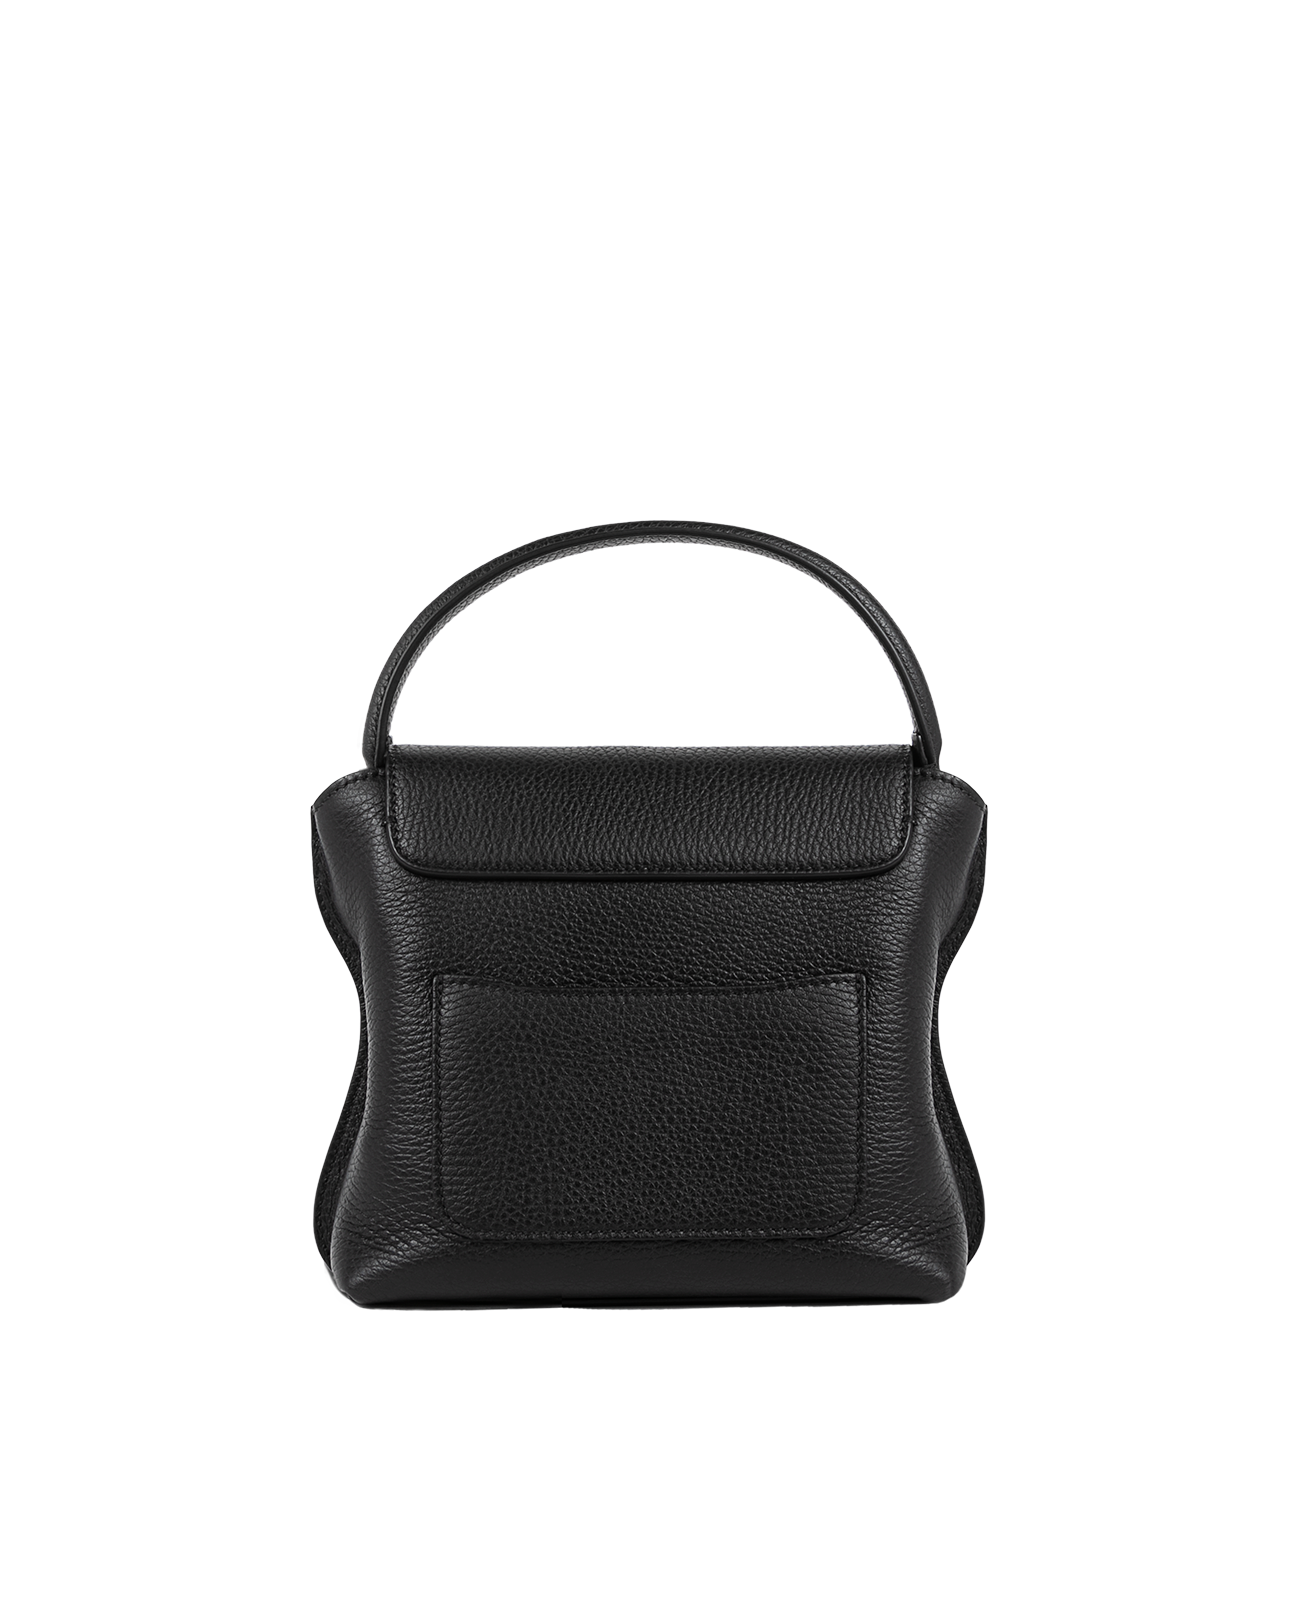 Cross-body bag in Italian full-grain leather, semi-aniline calf Italian leather with detachable shoulder strap.Three compartments, zip pocket in the back compartment. Magnetic flap closure with logo. Color: Black. Size:Medium